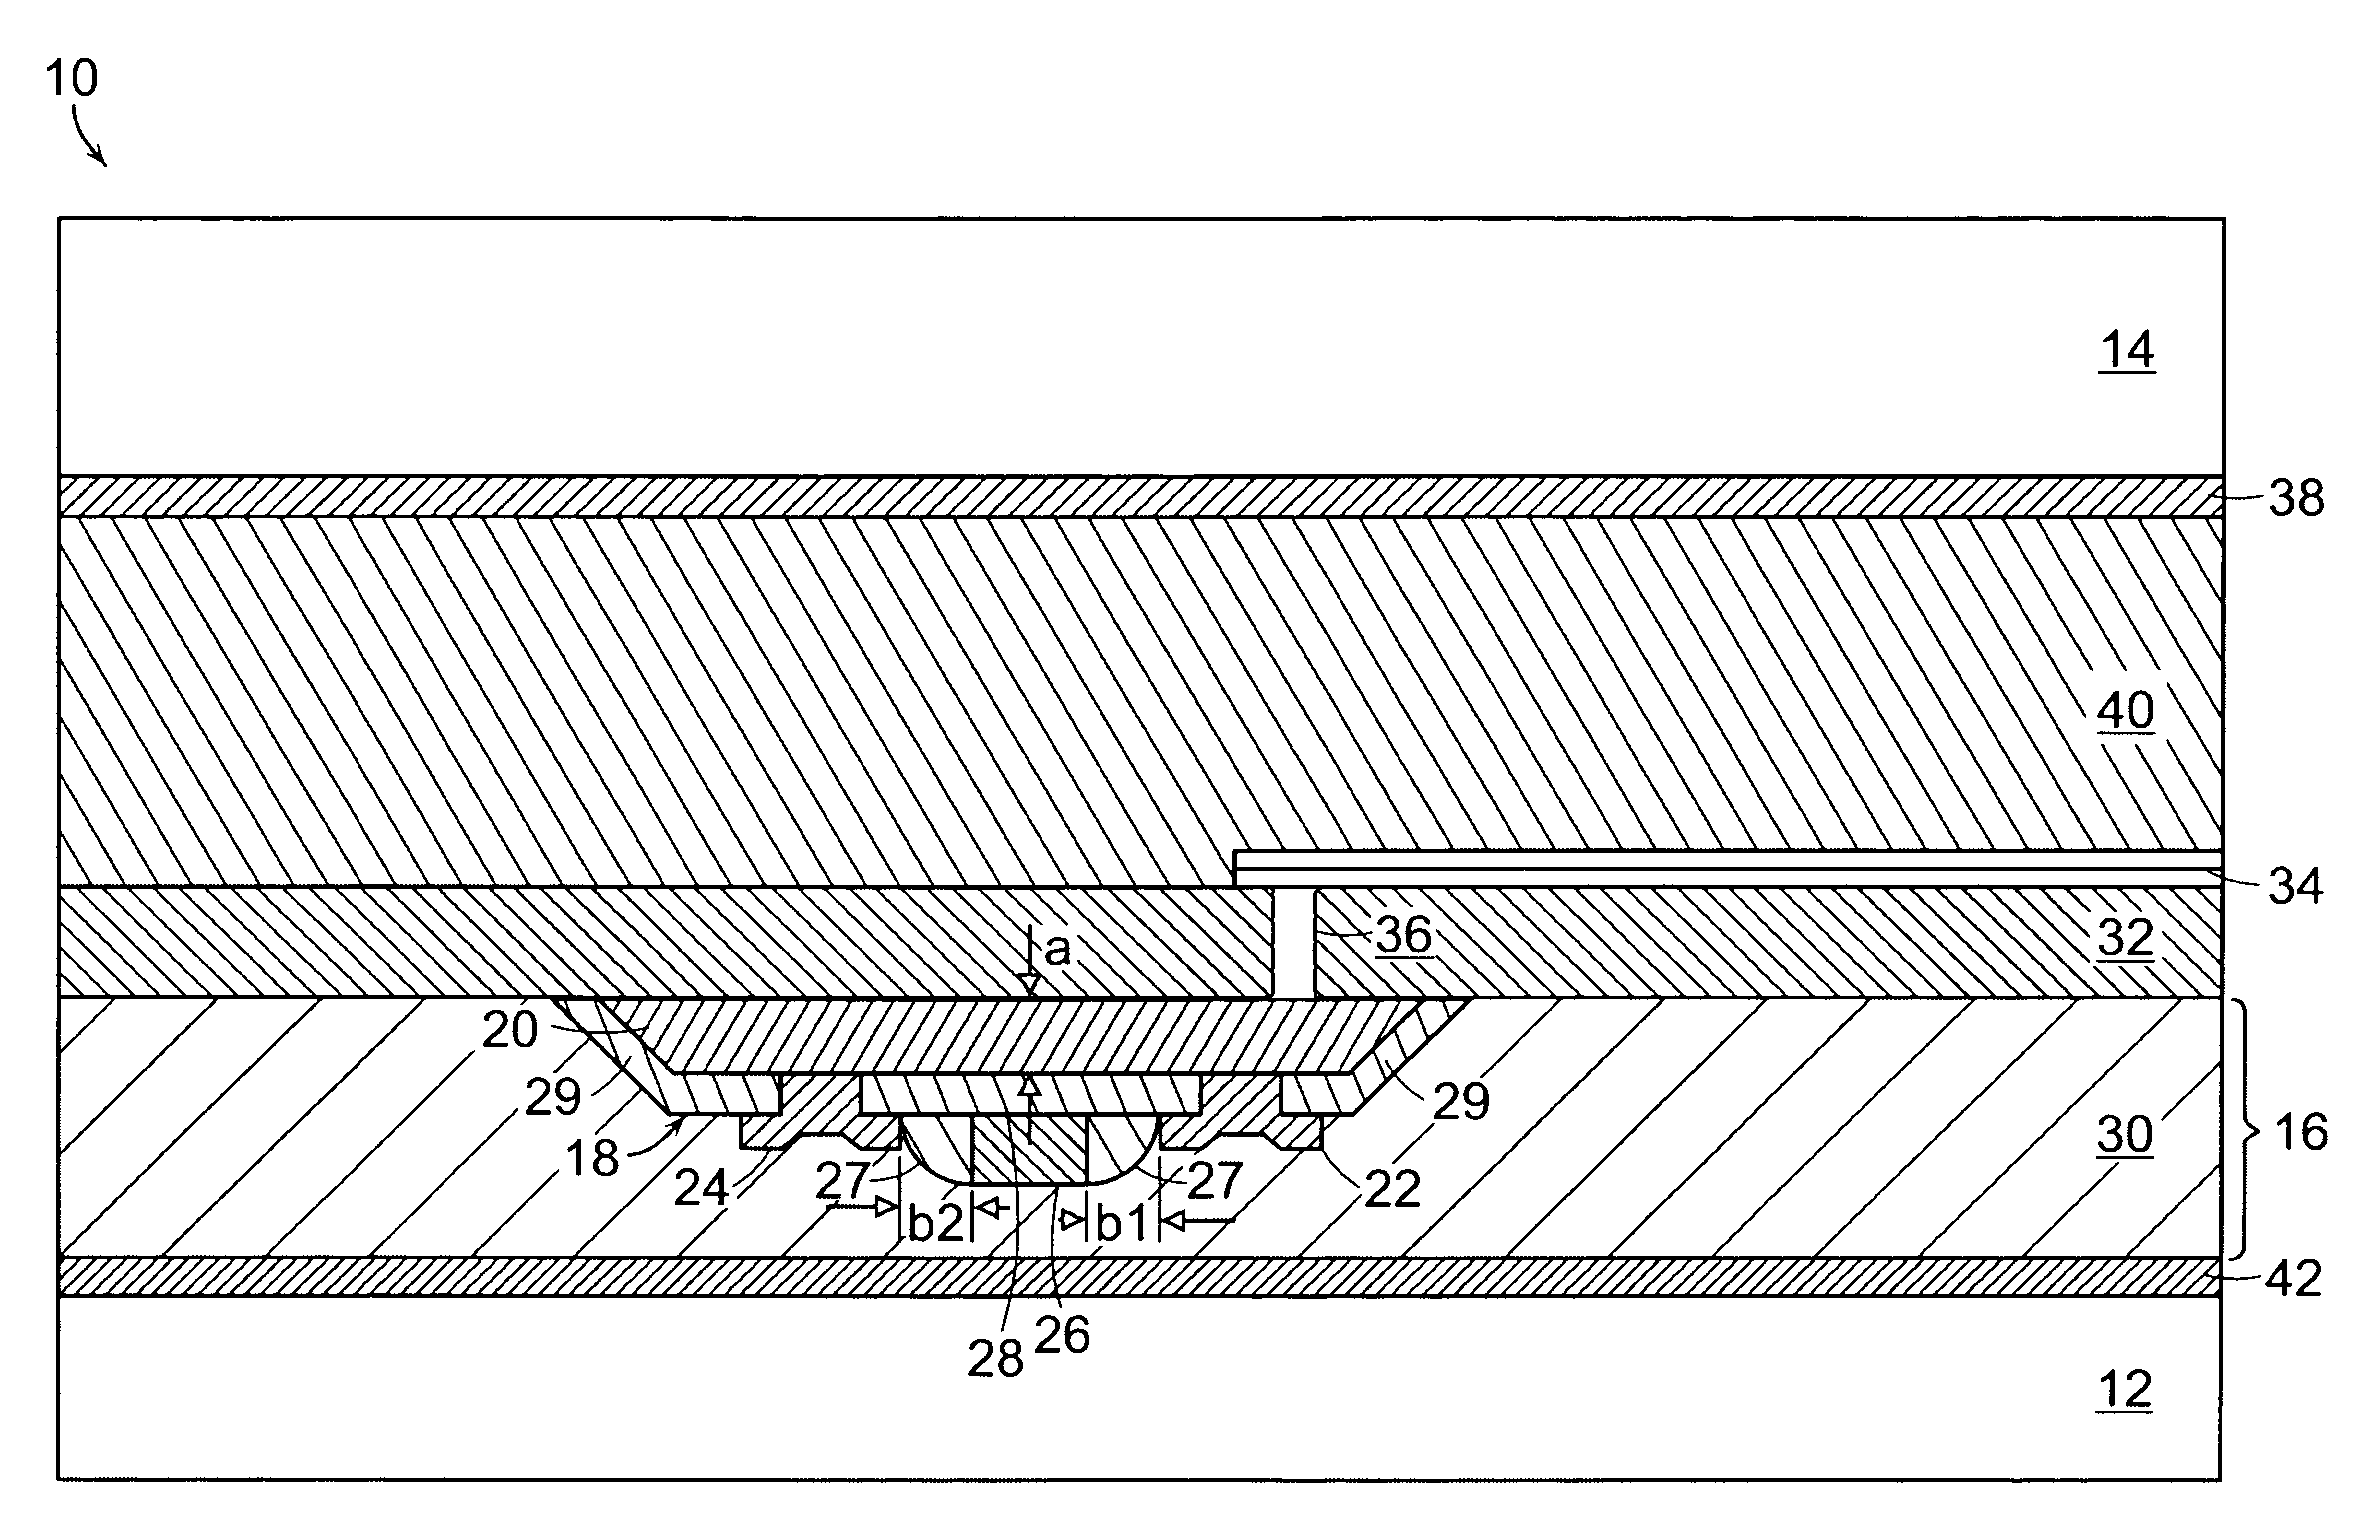 Display system with single crystal Si thin film transistors